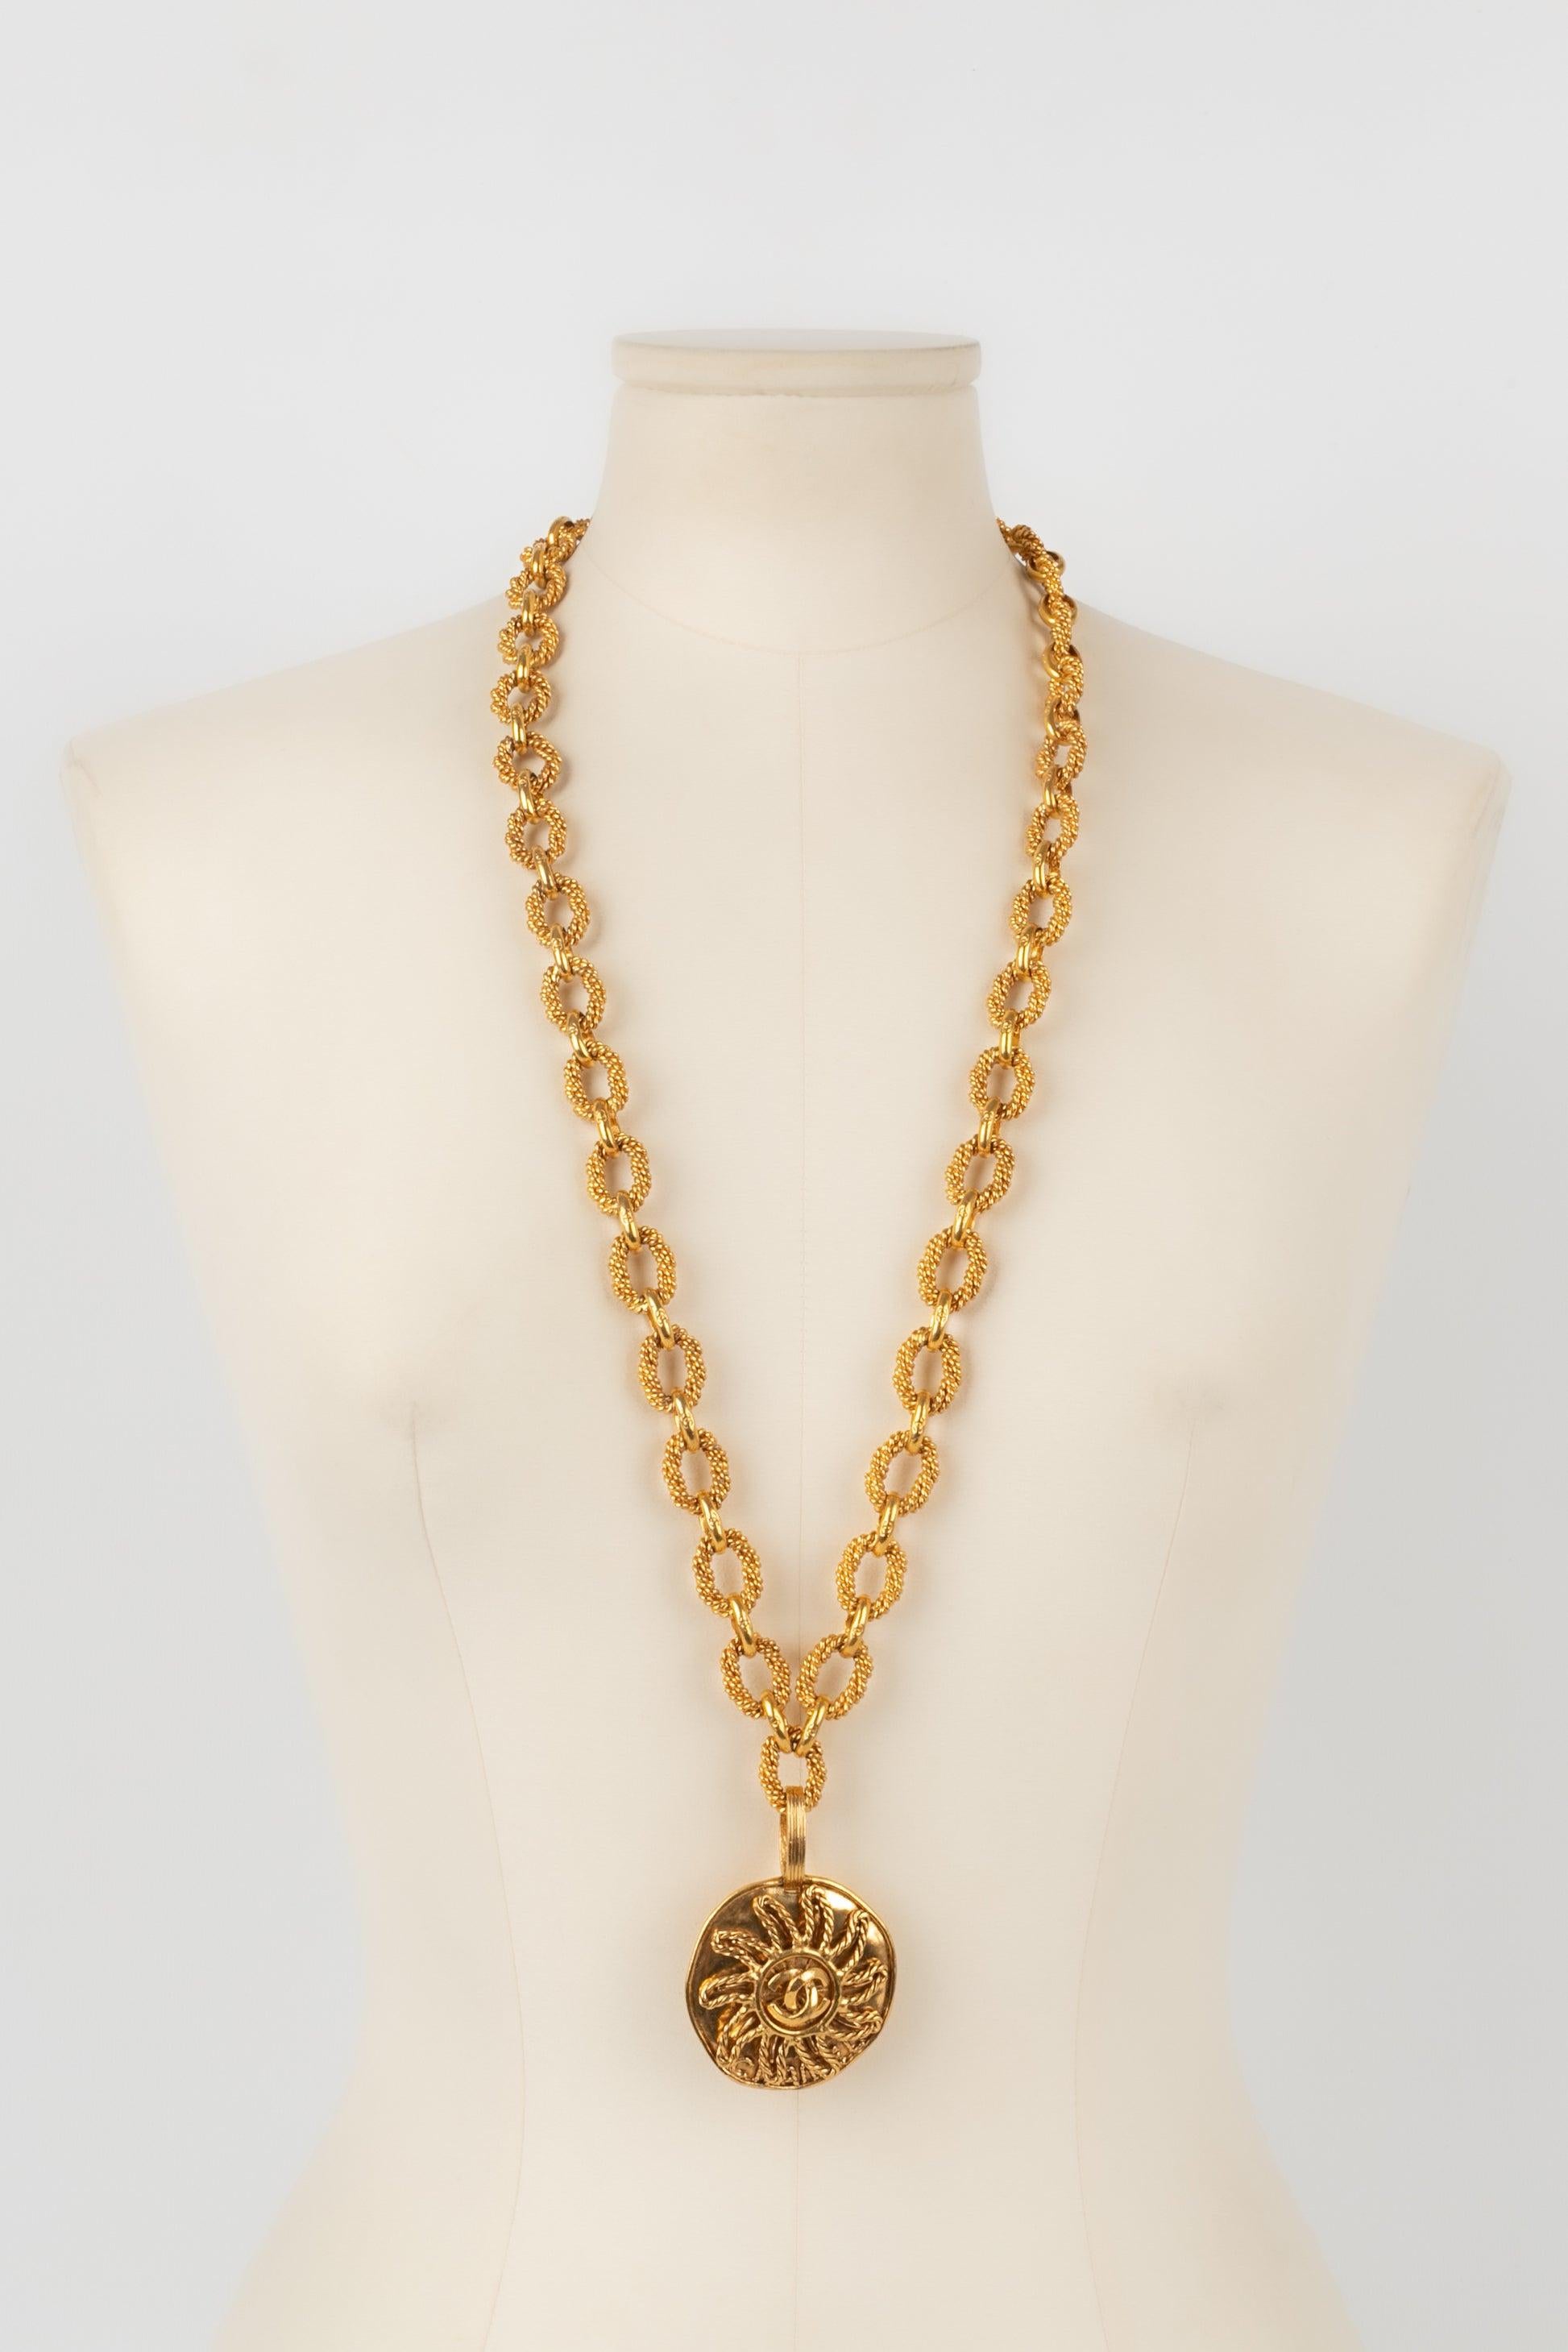 Chanel Golden Metal Necklace with a Sun Pendant, 1993 For Sale 4